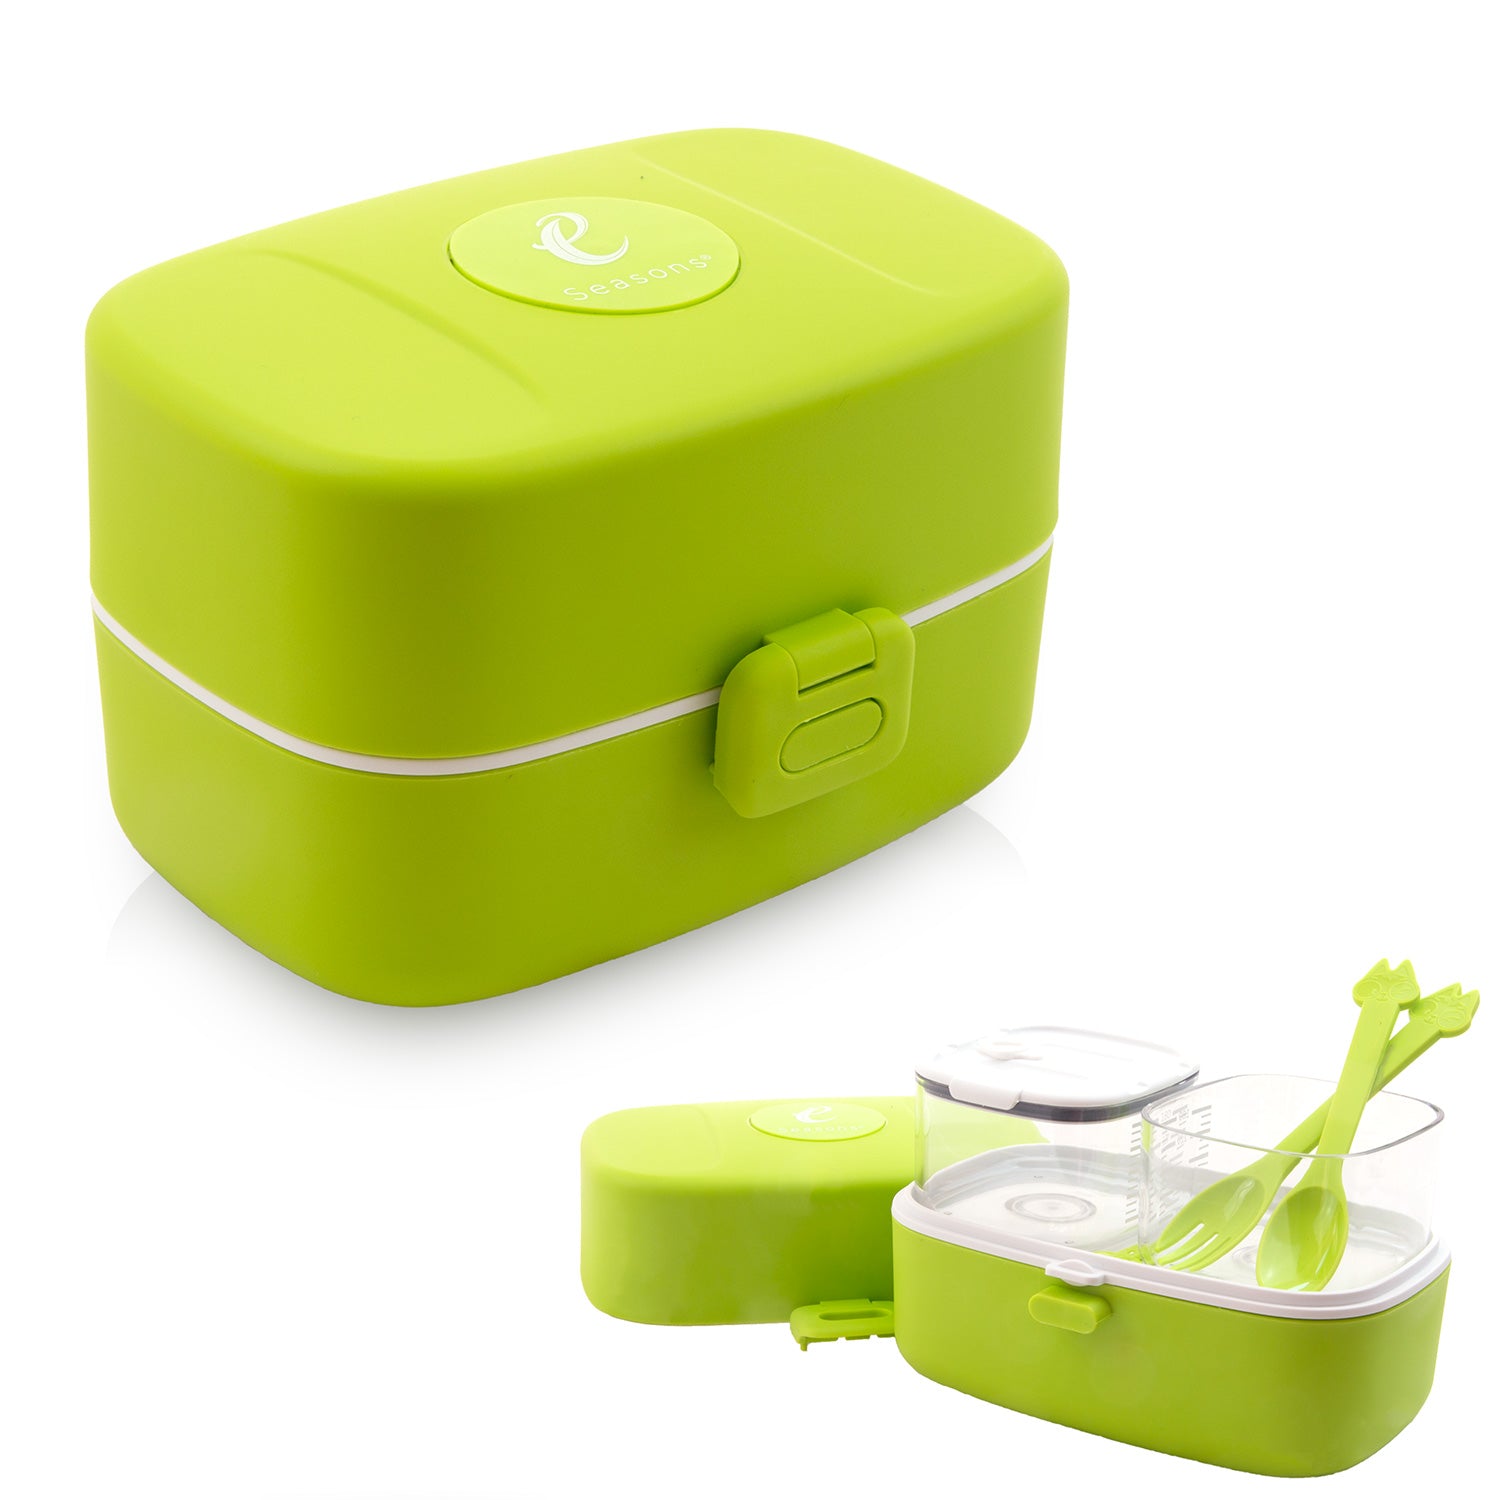 Lunch Box Food Container Bento Box with Utensils, Size: 3 Compartments